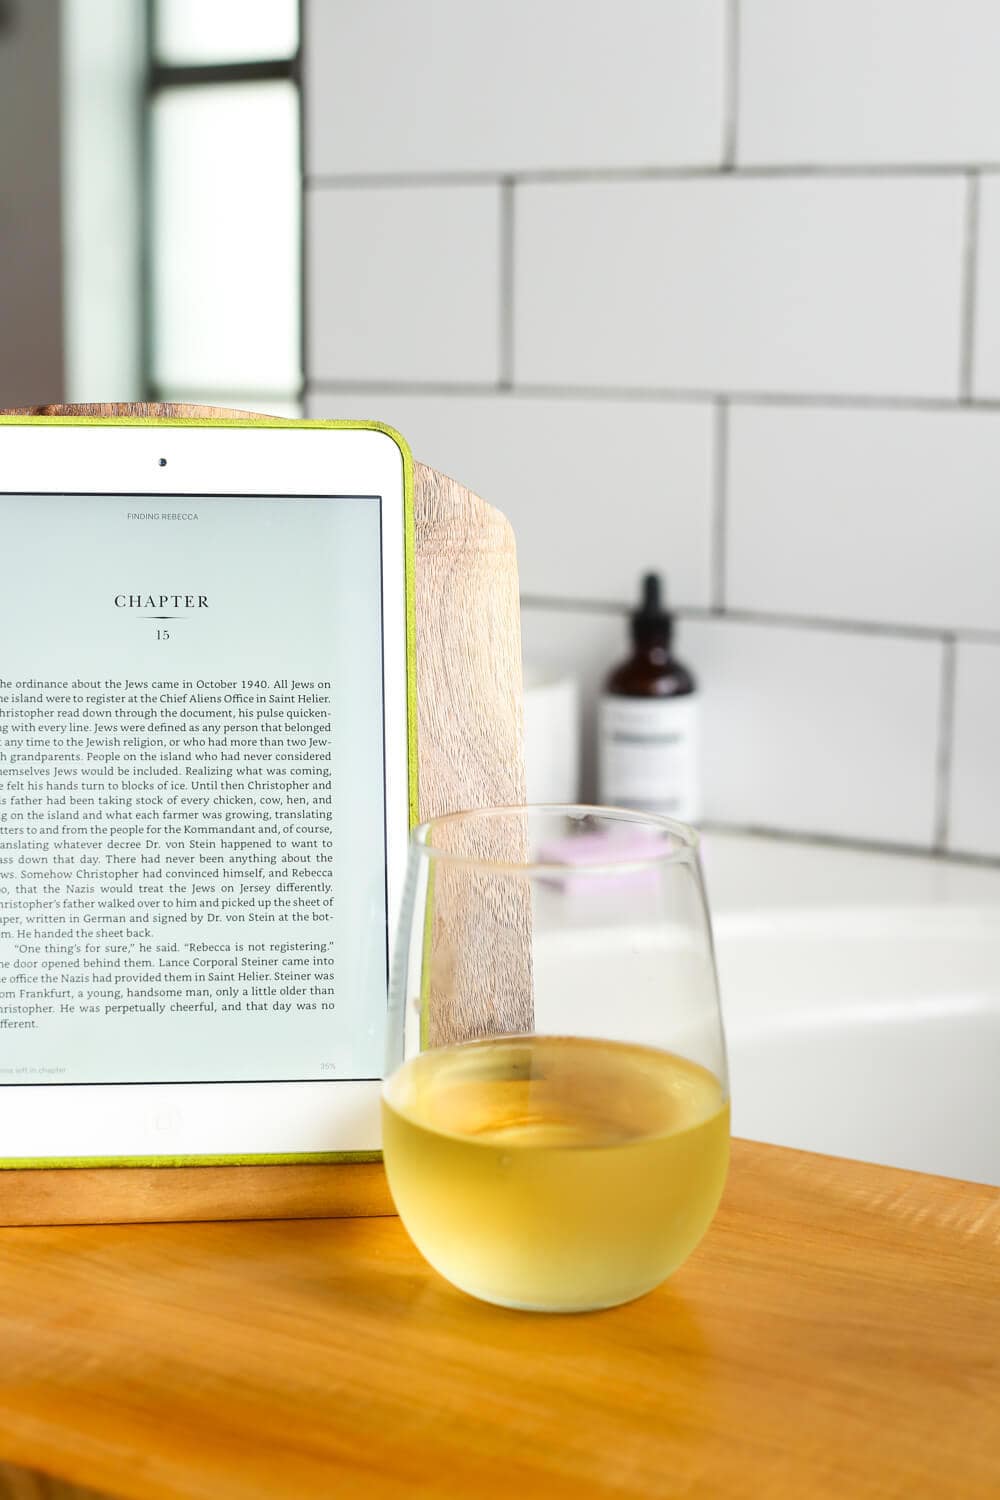 close up of a bath tub tray with an iPad and a glass of wine